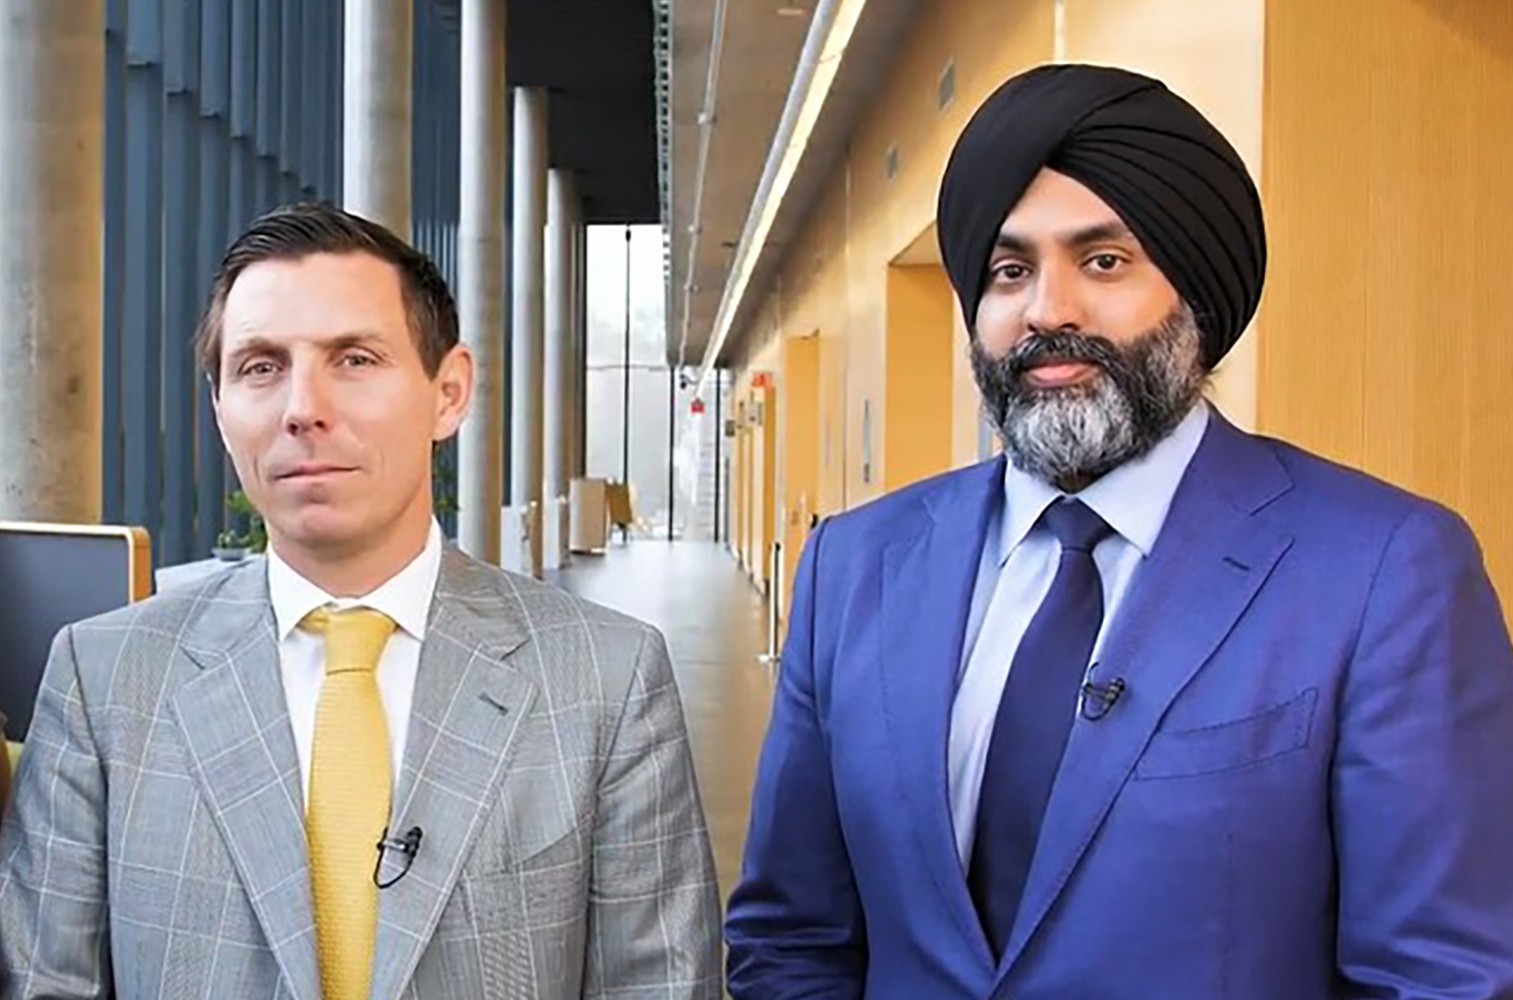 Brampton Councillor Harkirat Singh coy about cross-country travel to support Patrick Brown’s CPC leadership bid